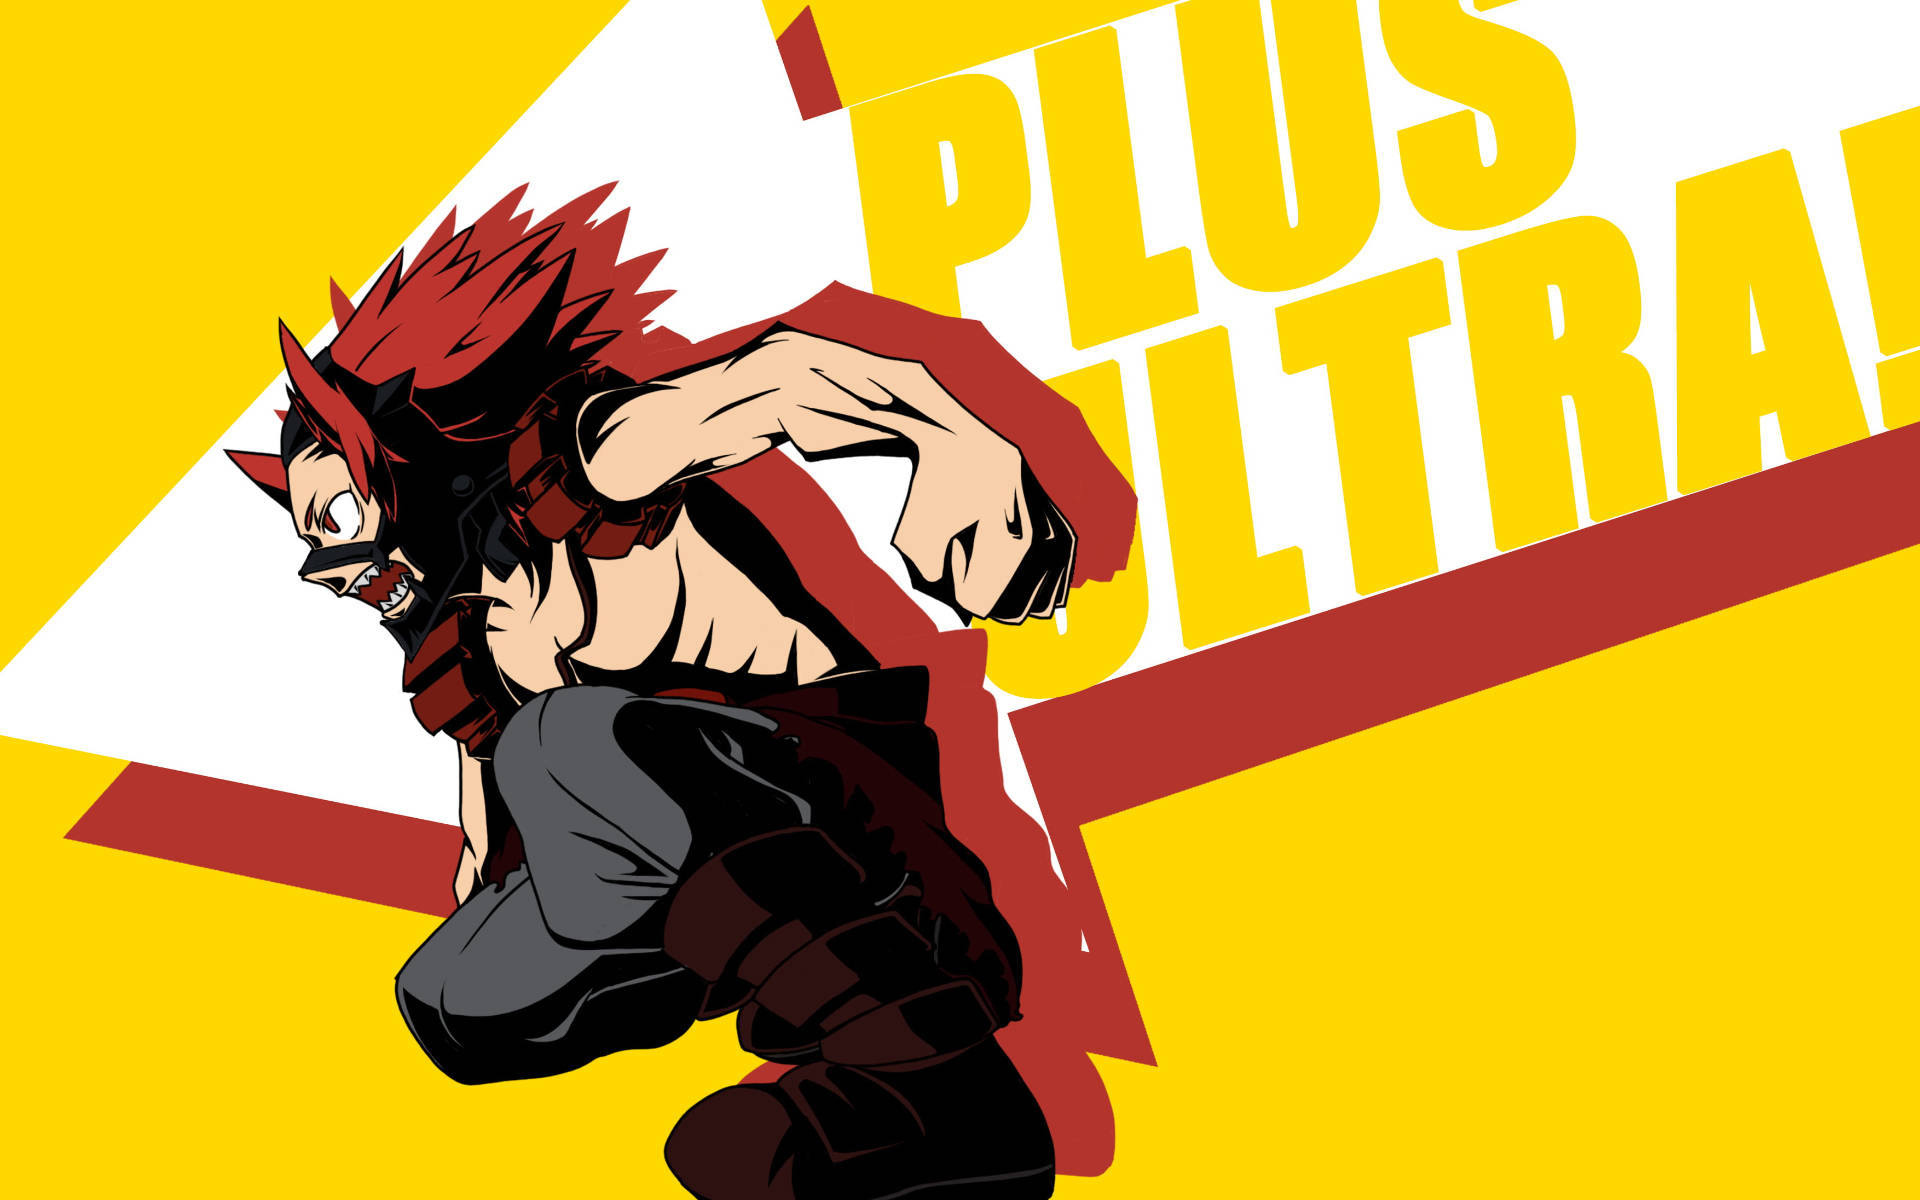 (this Would Refer To A Wallpaper Featuring The Character Eijiro Kirishima From The Anime My Hero Academia, With The Words 